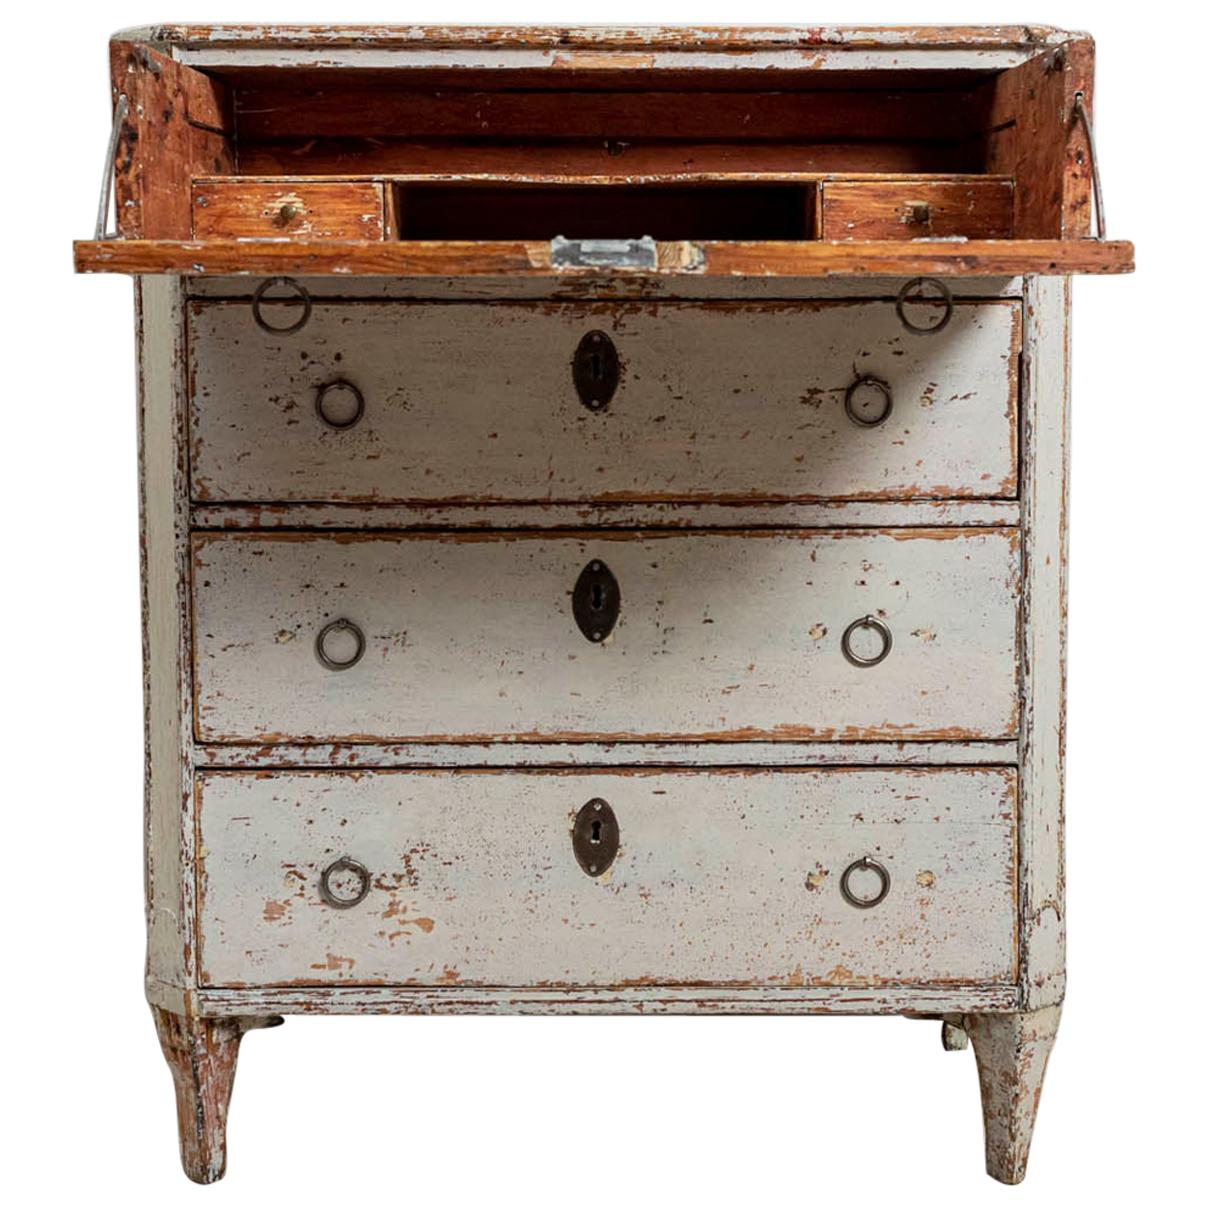 18th Century Gustavian Painted Four-Drawer Commode with a Concealed Bureau